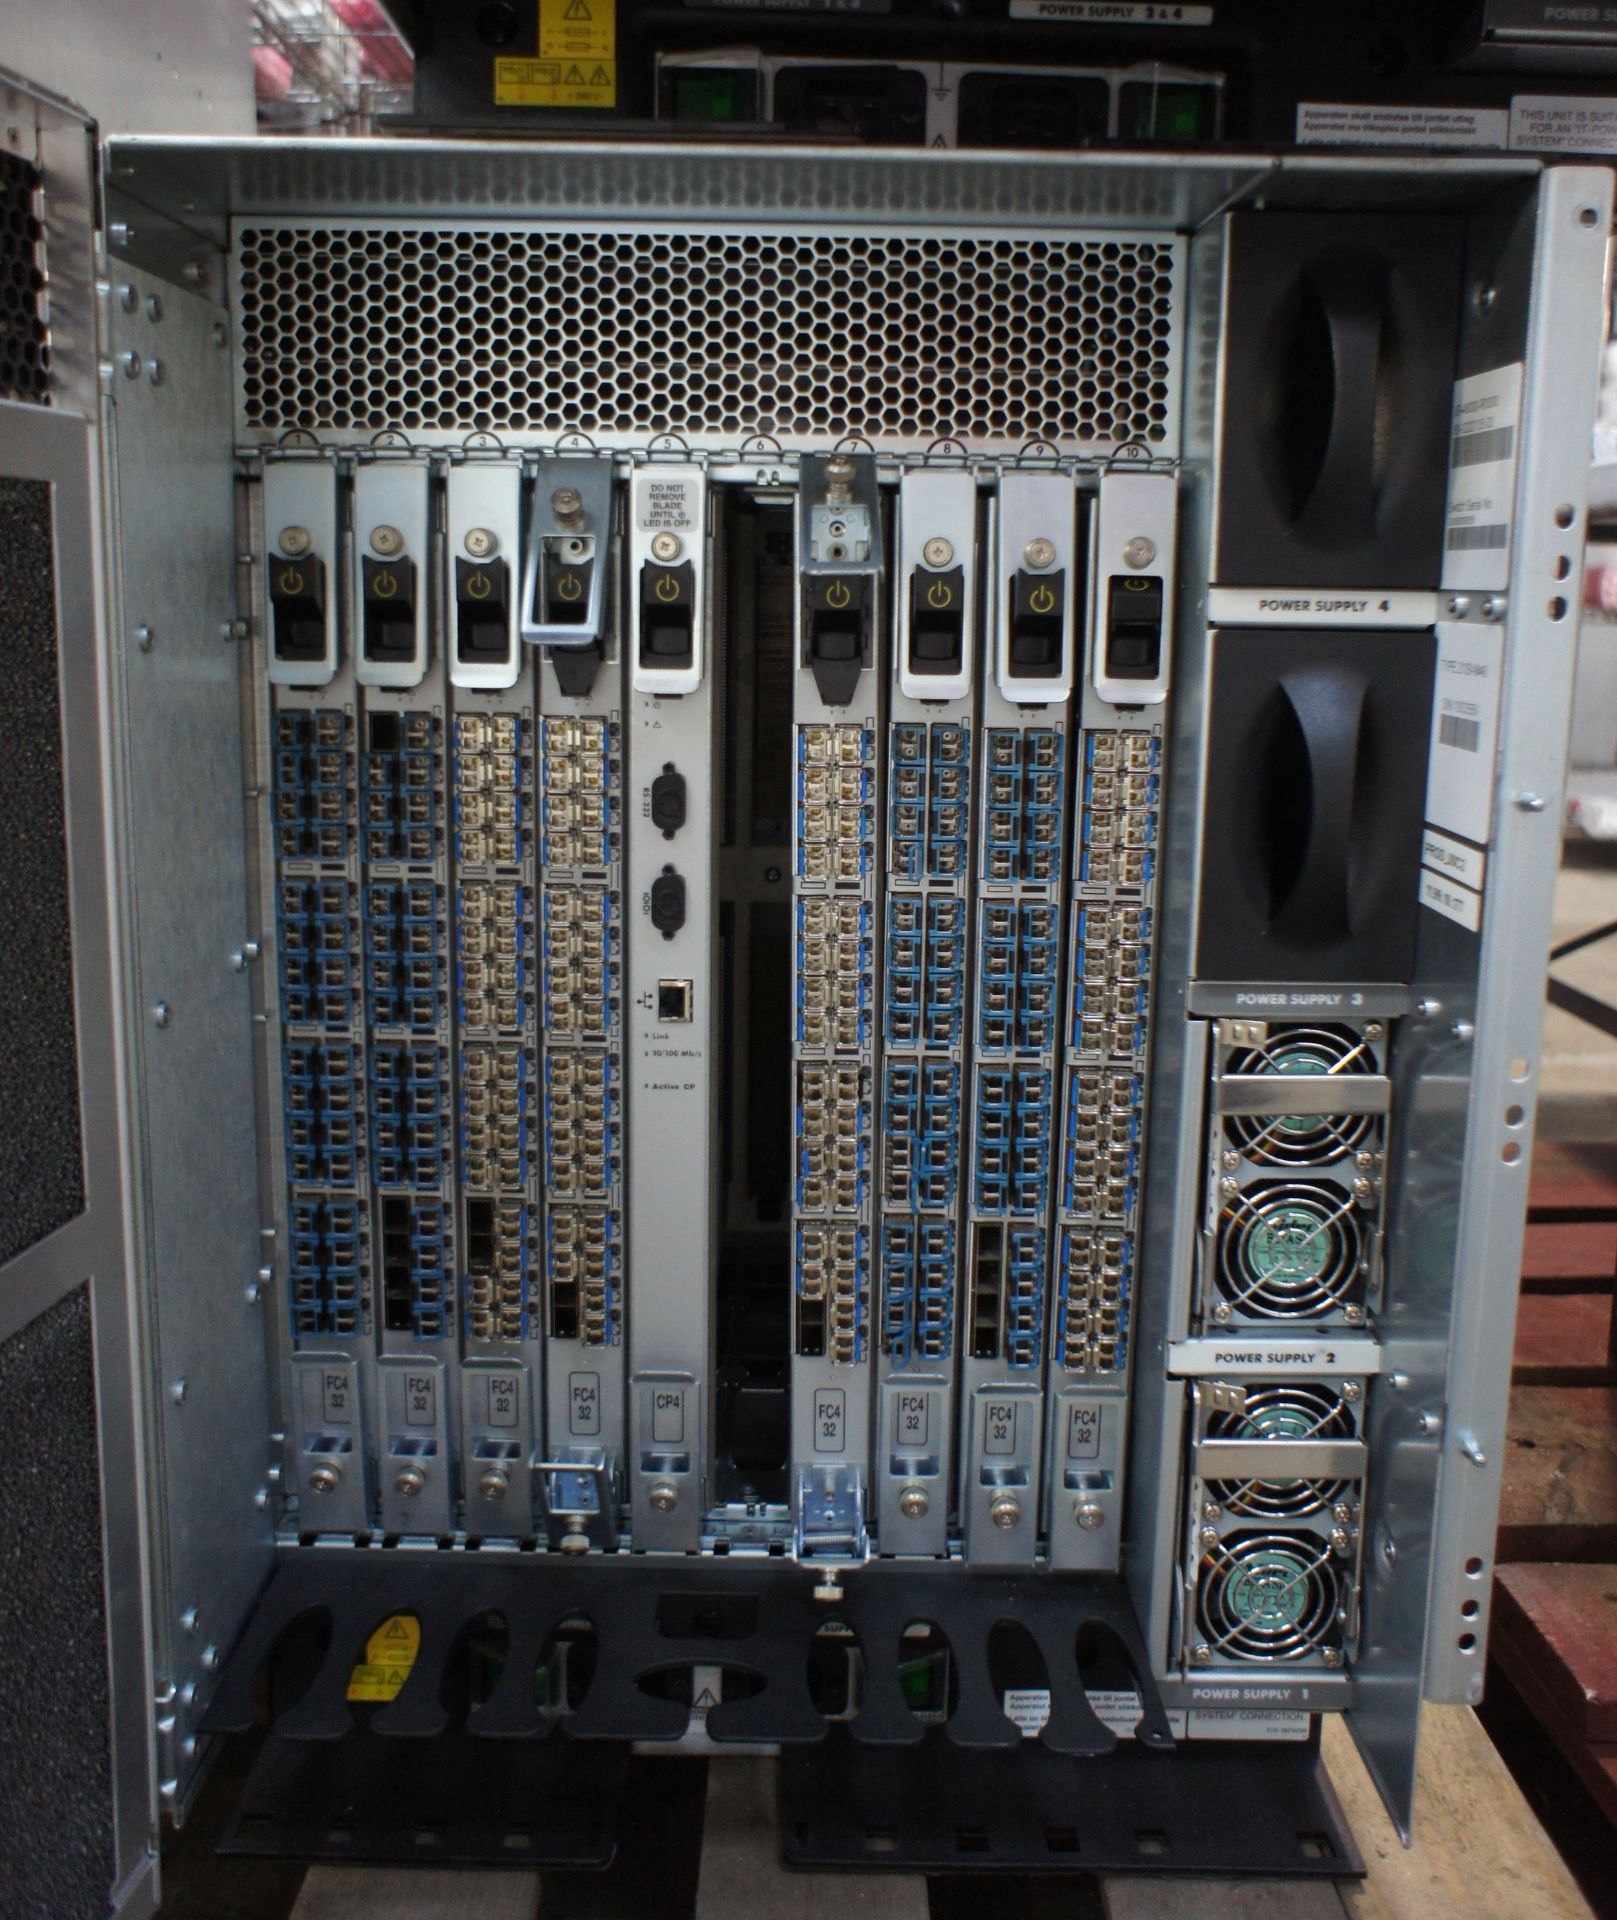 IBM2109-M48 SAN256 director cabinet with 8x FC4/32 cards and 1x CP4 cards, IBM2109-M48 SAN256